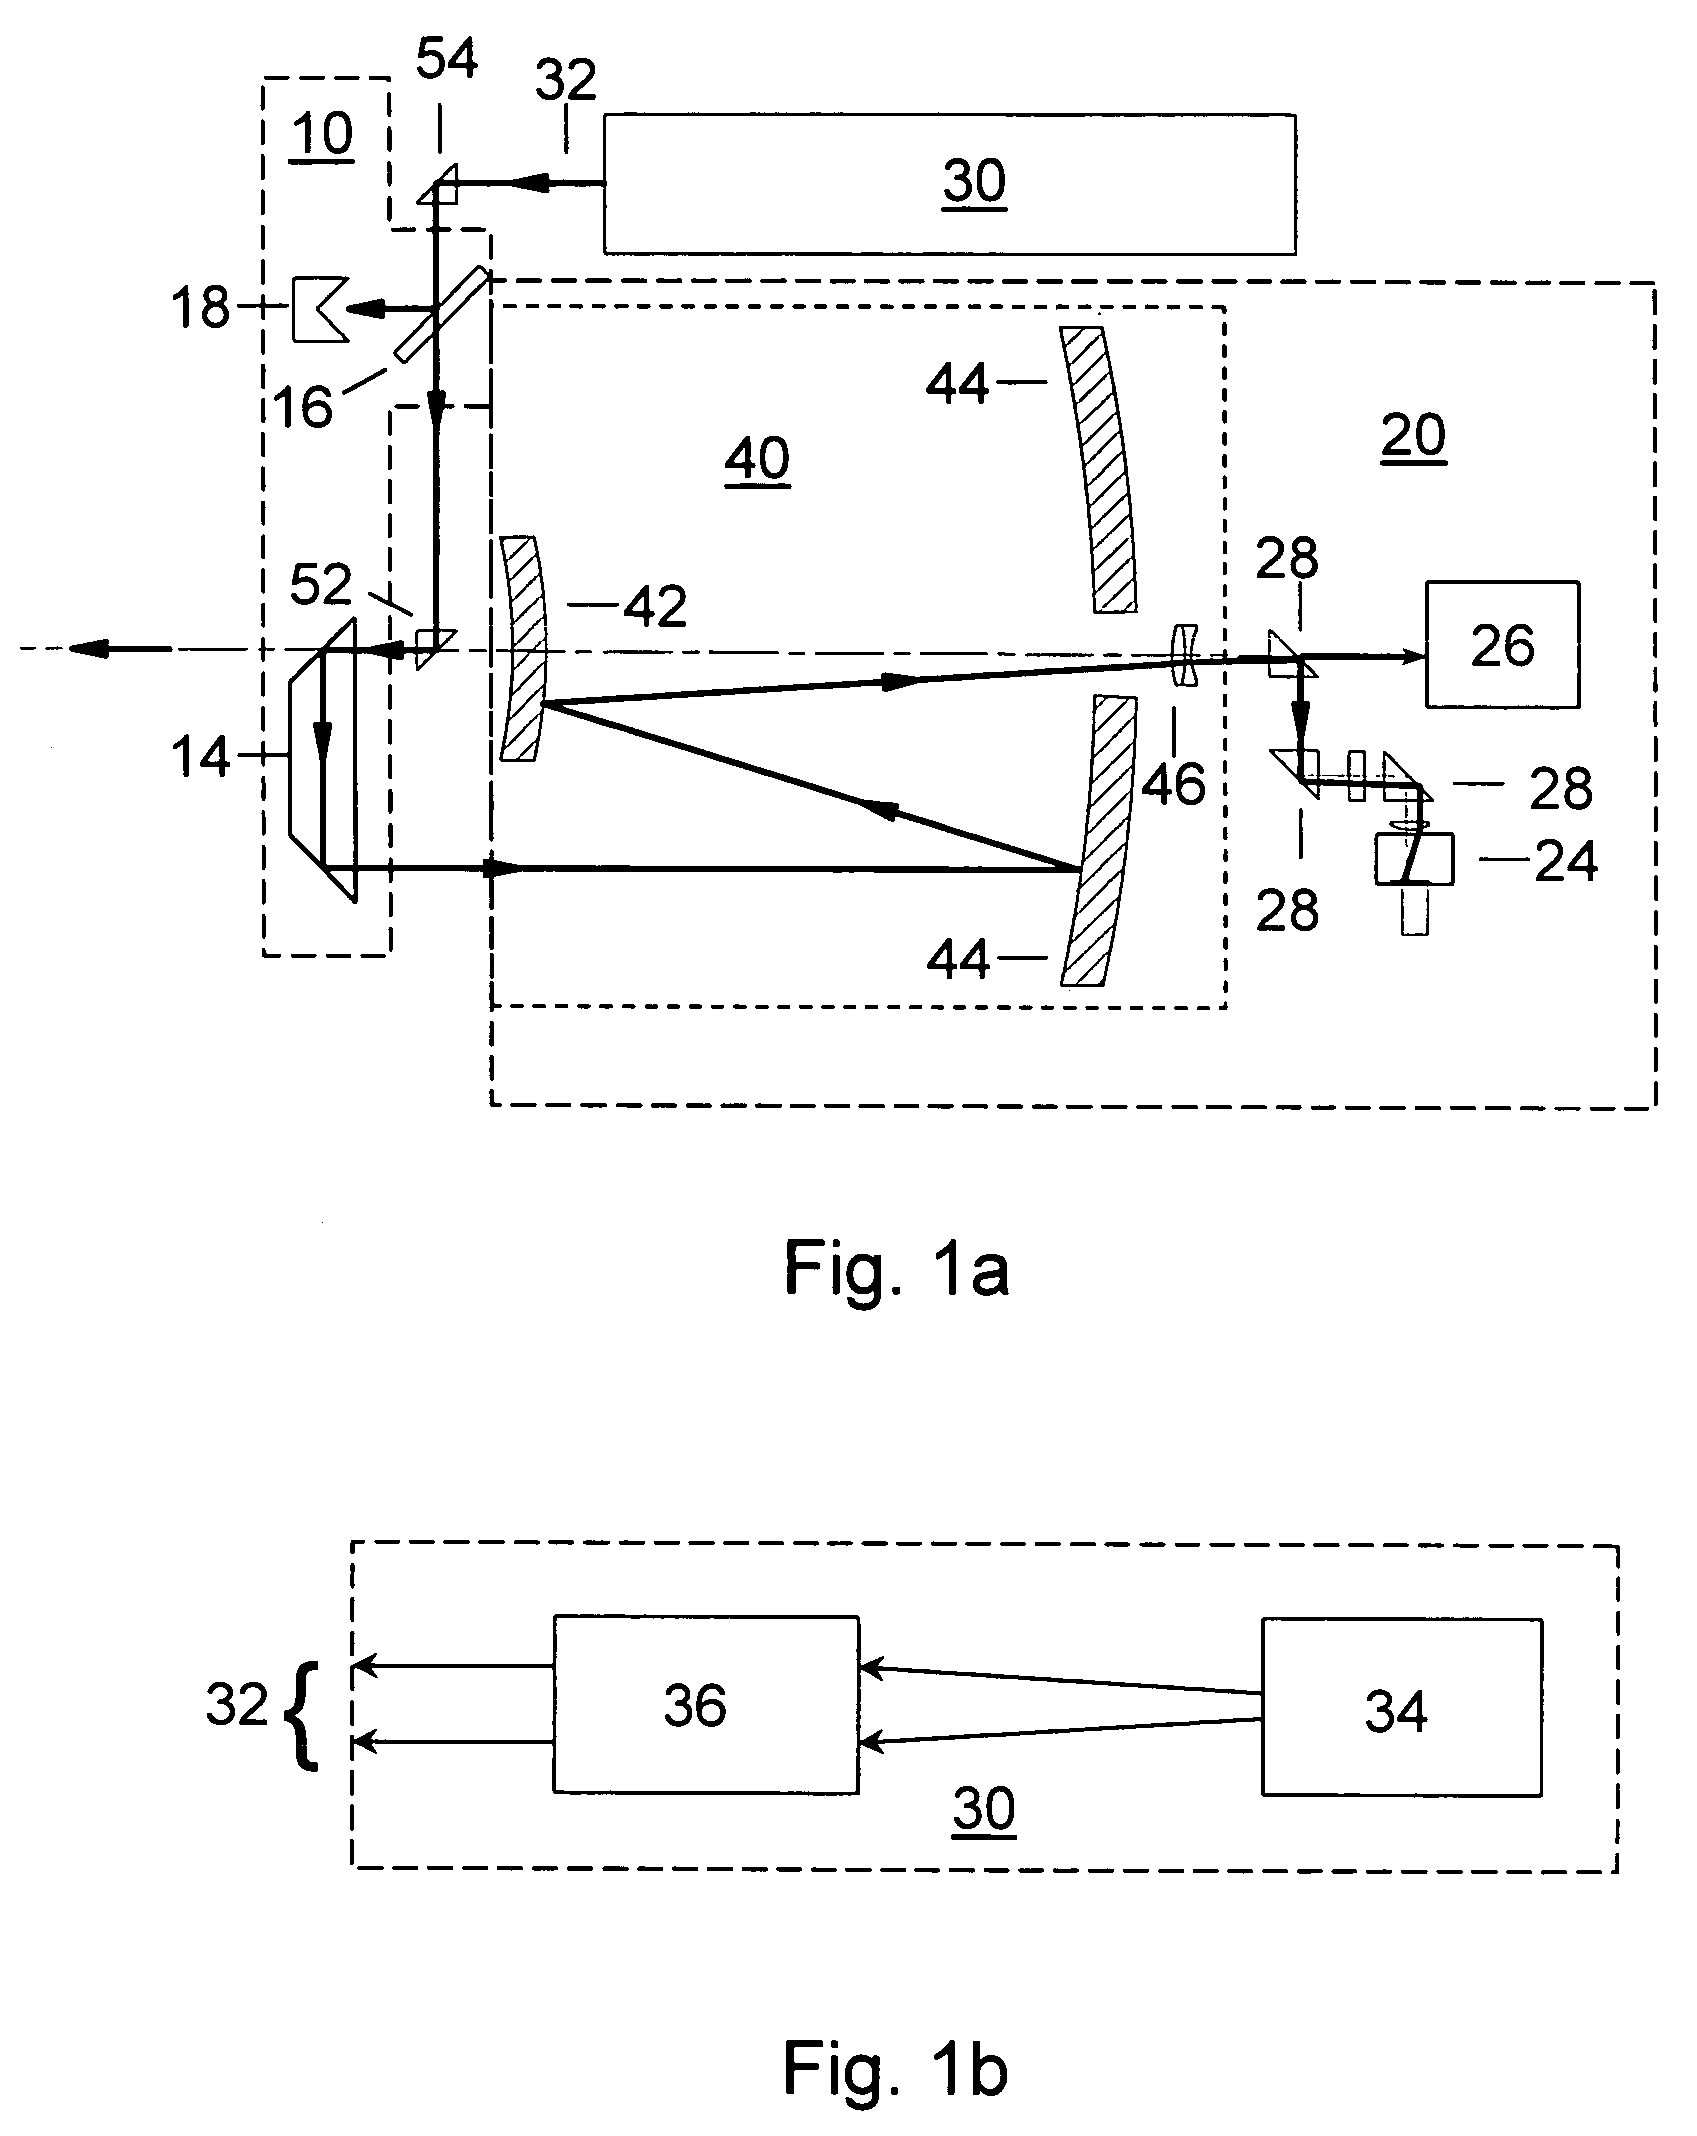 Method to determine and adjust the alignment of the transmitter and receiver fields of view of a LIDAR system